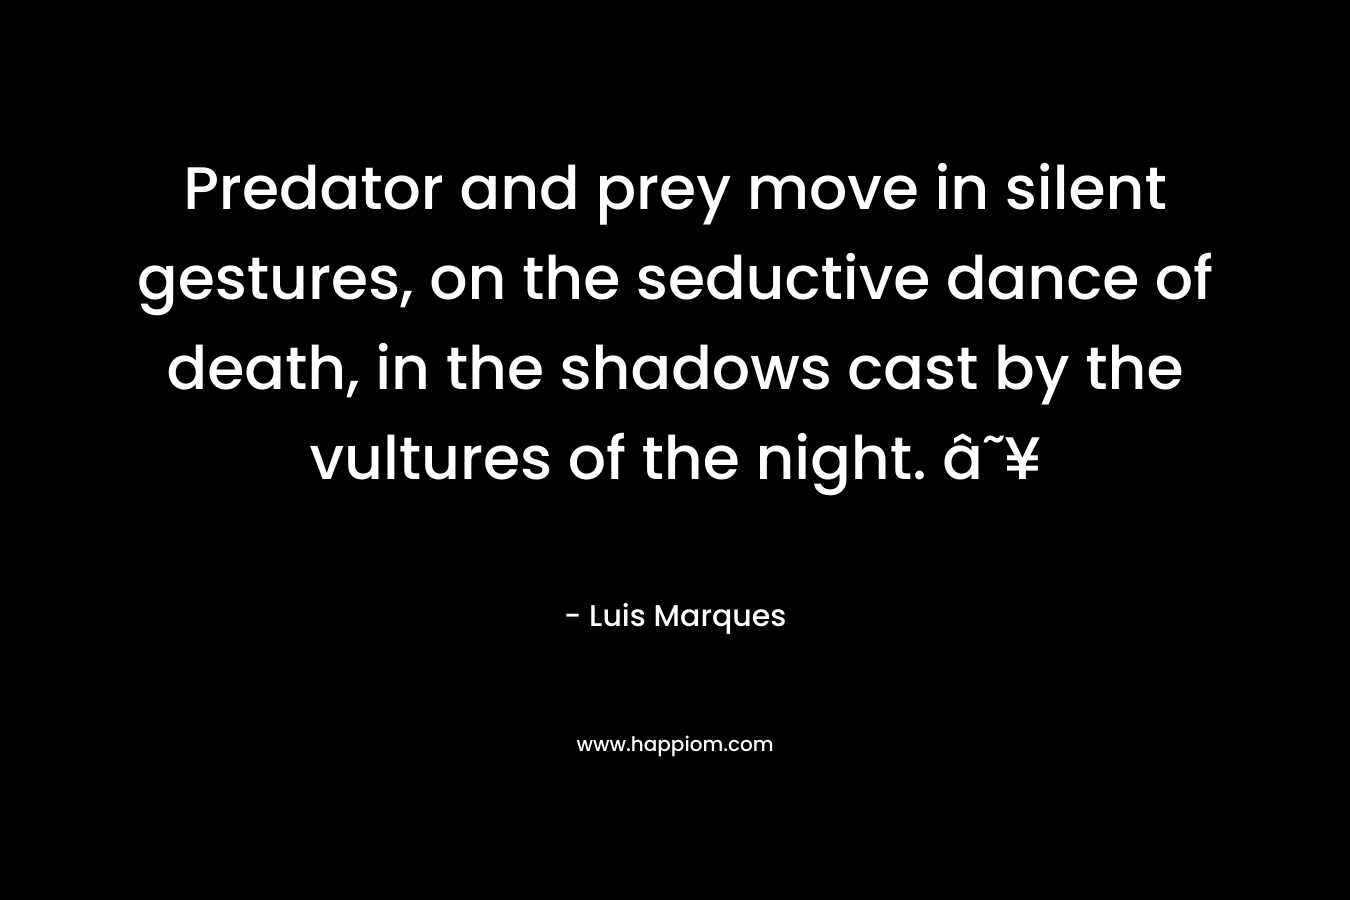 Predator and prey move in silent gestures, on the seductive dance of death, in the shadows cast by the vultures of the night. â˜¥ – Luis Marques